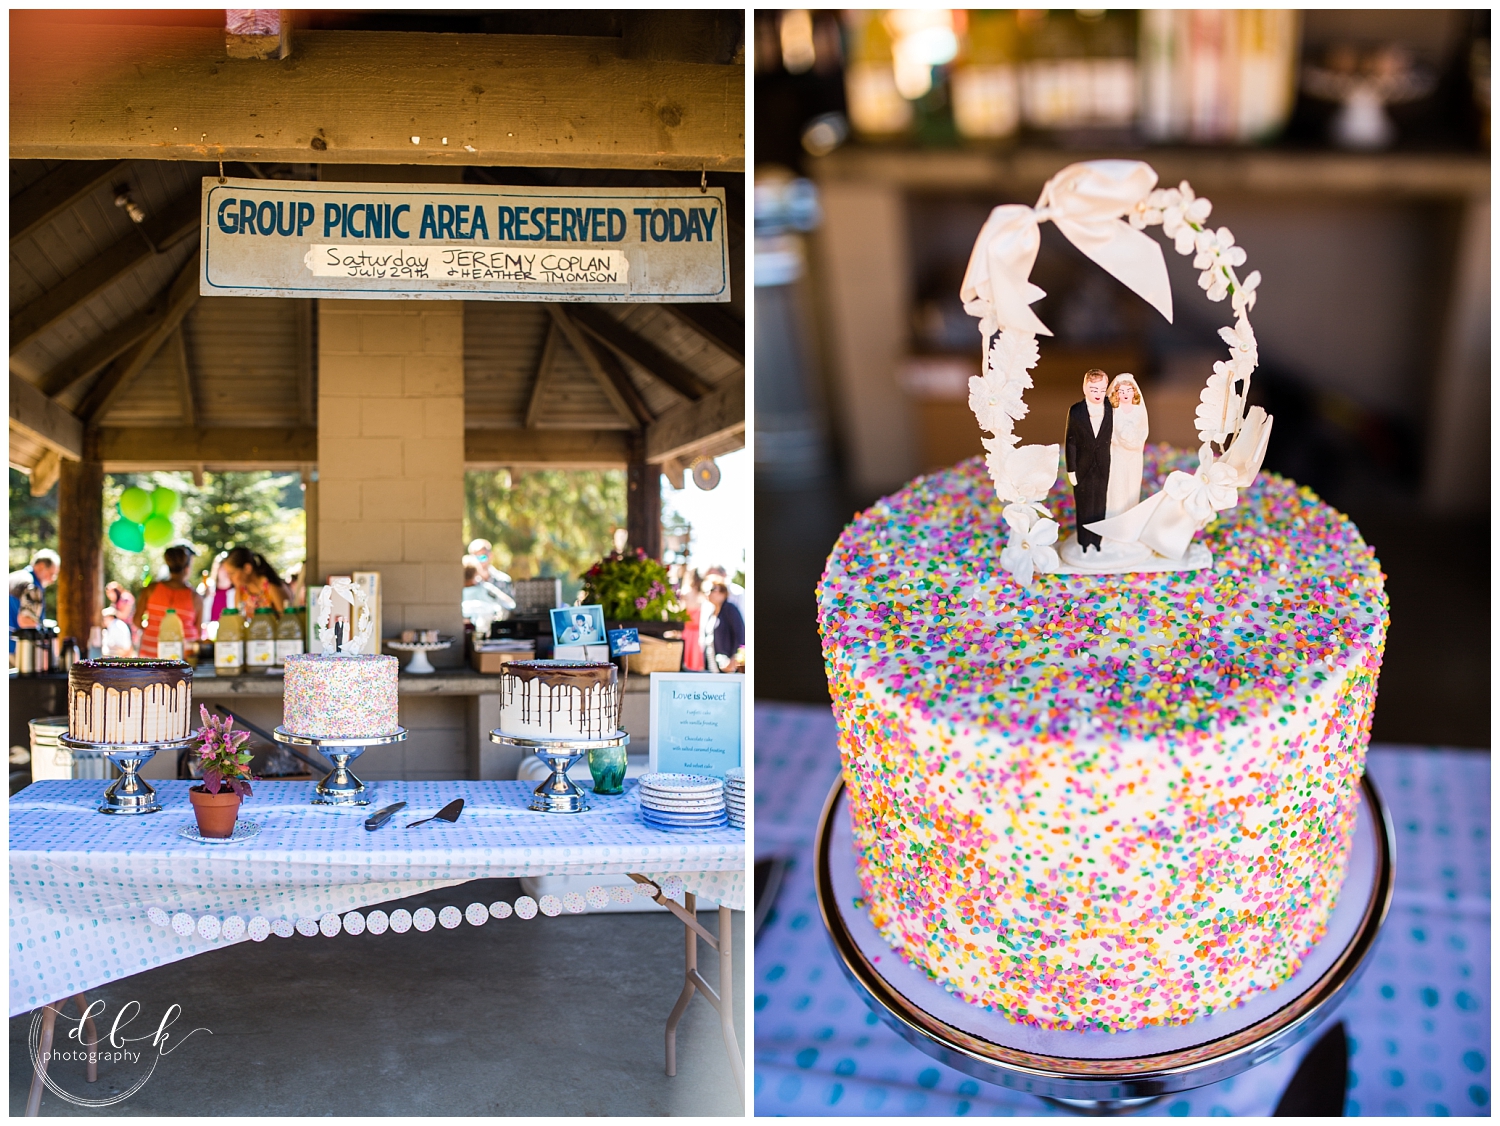 wedding cake with sprinkles at group picnic area at Washington Park in Anacortes